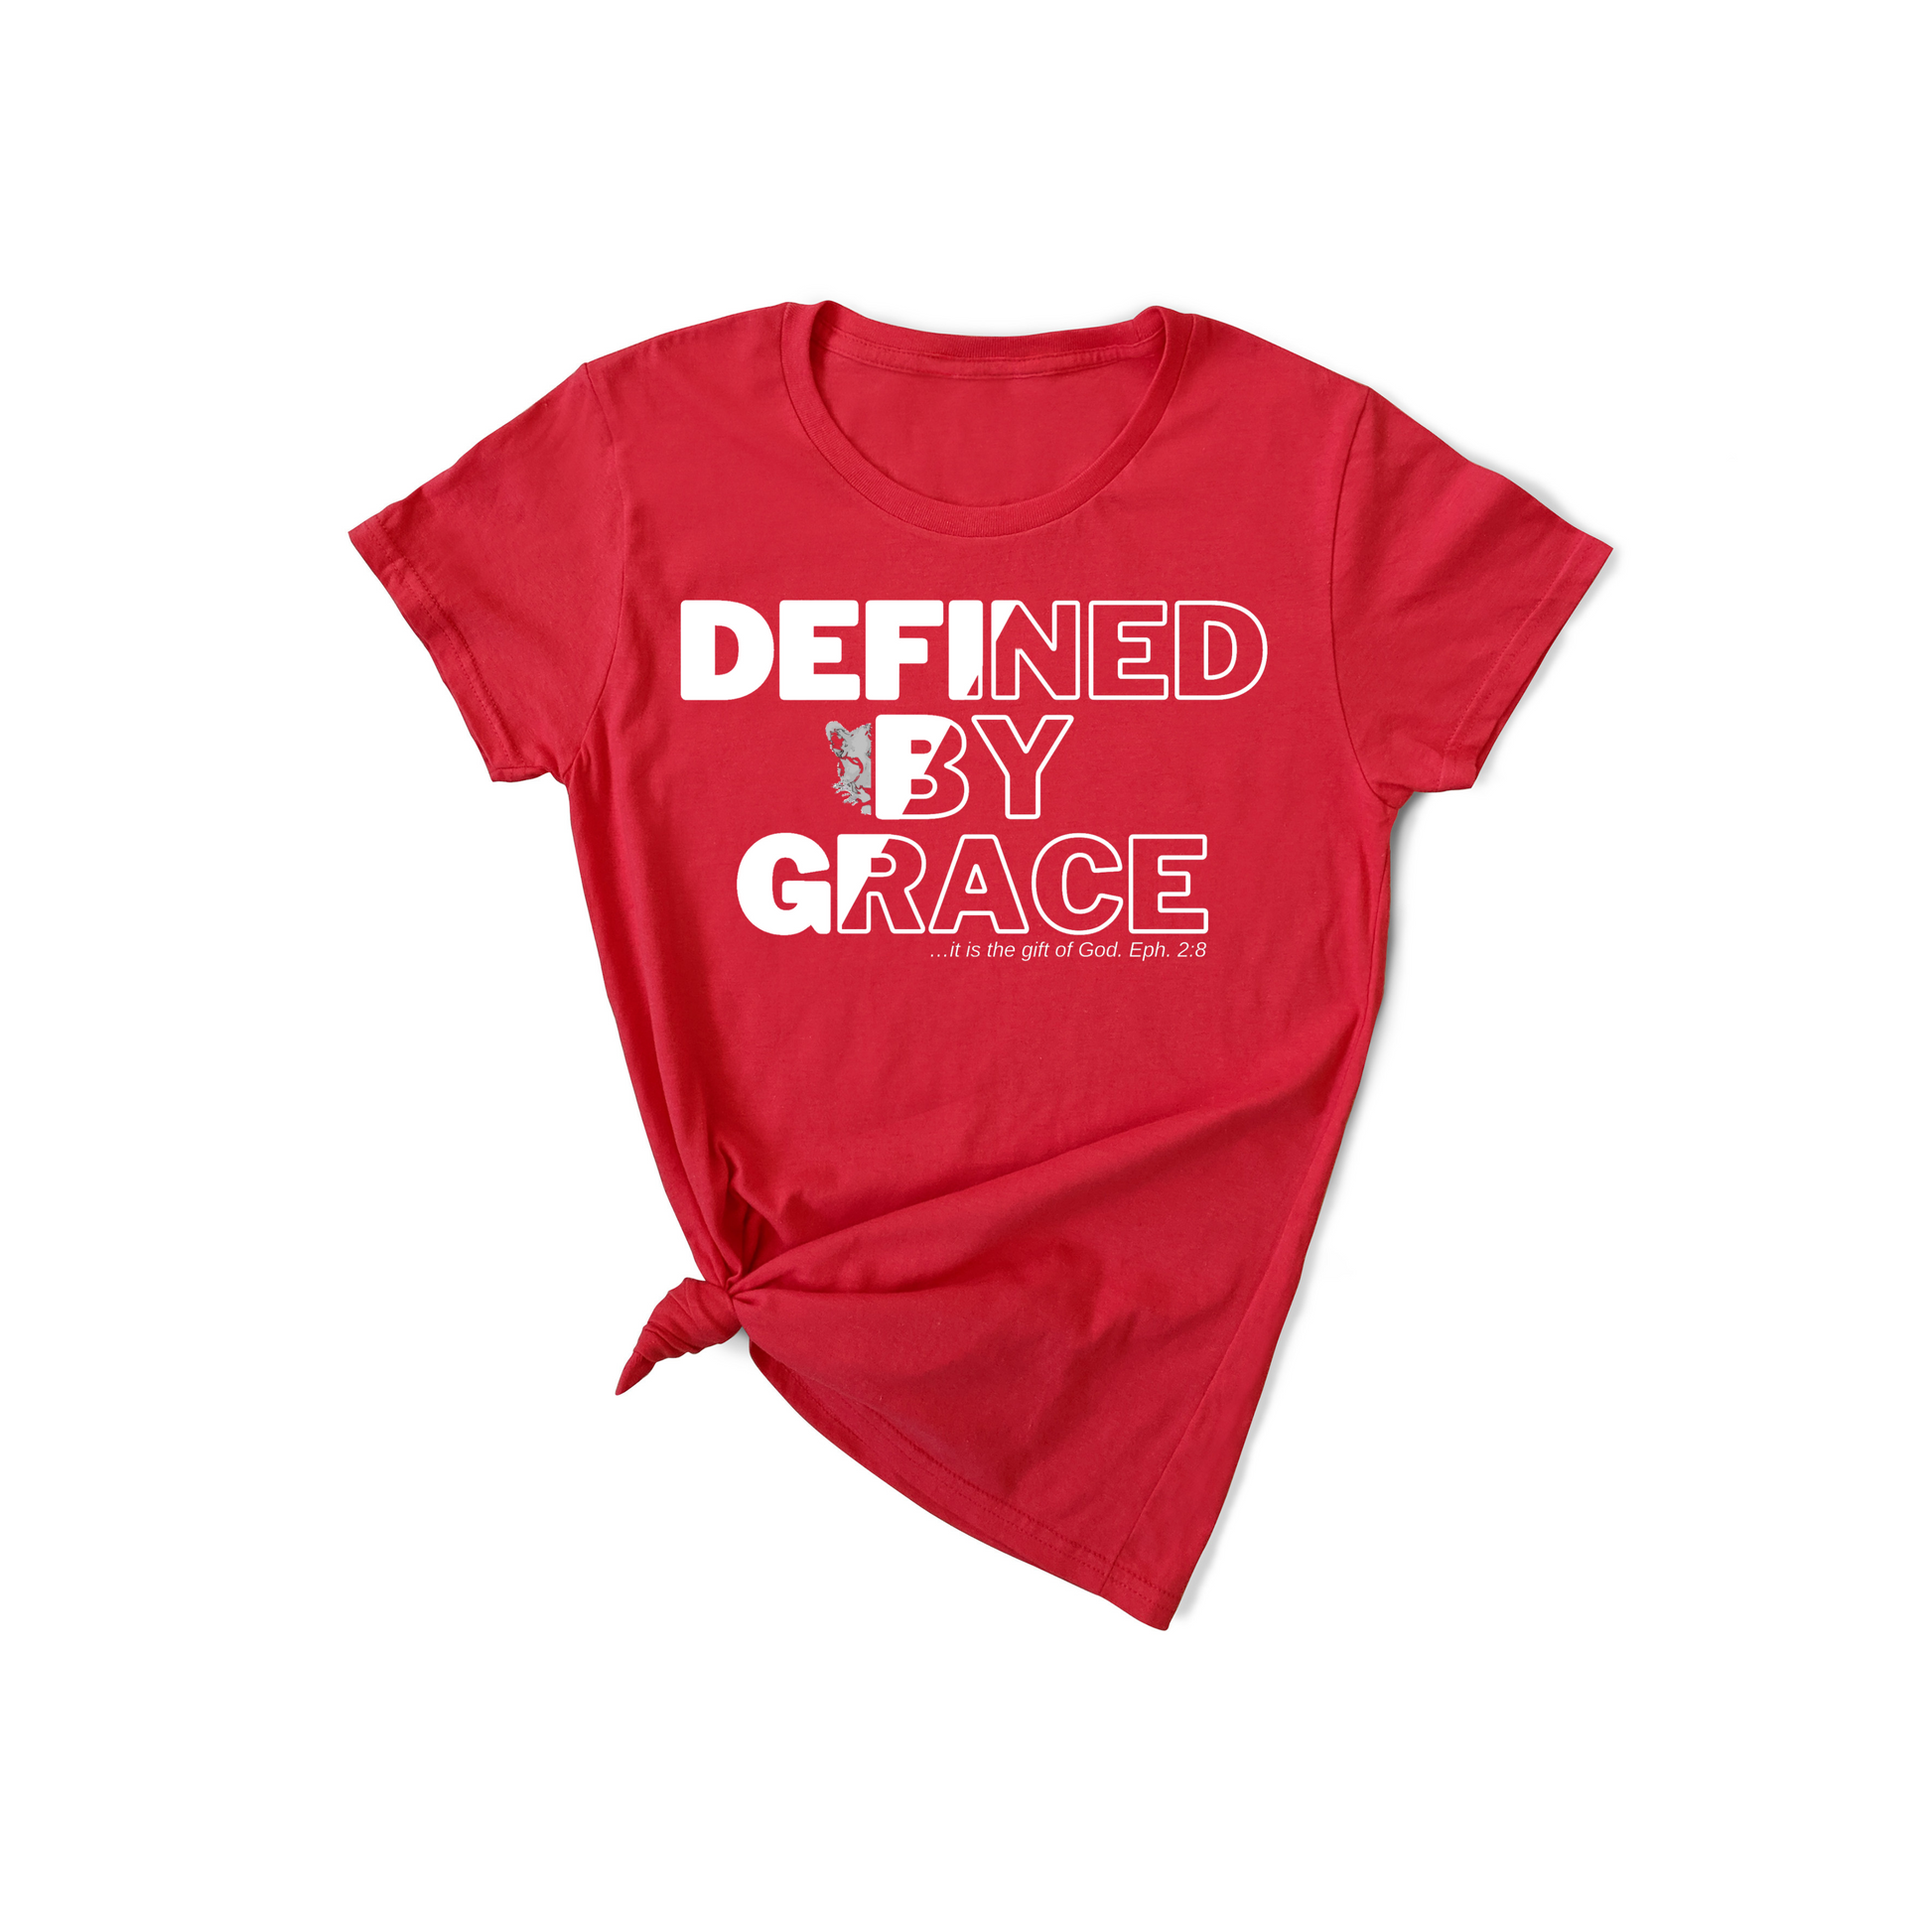 Defined by Grace - Ephesians 2:8 Inspiration T-Shirt - Red